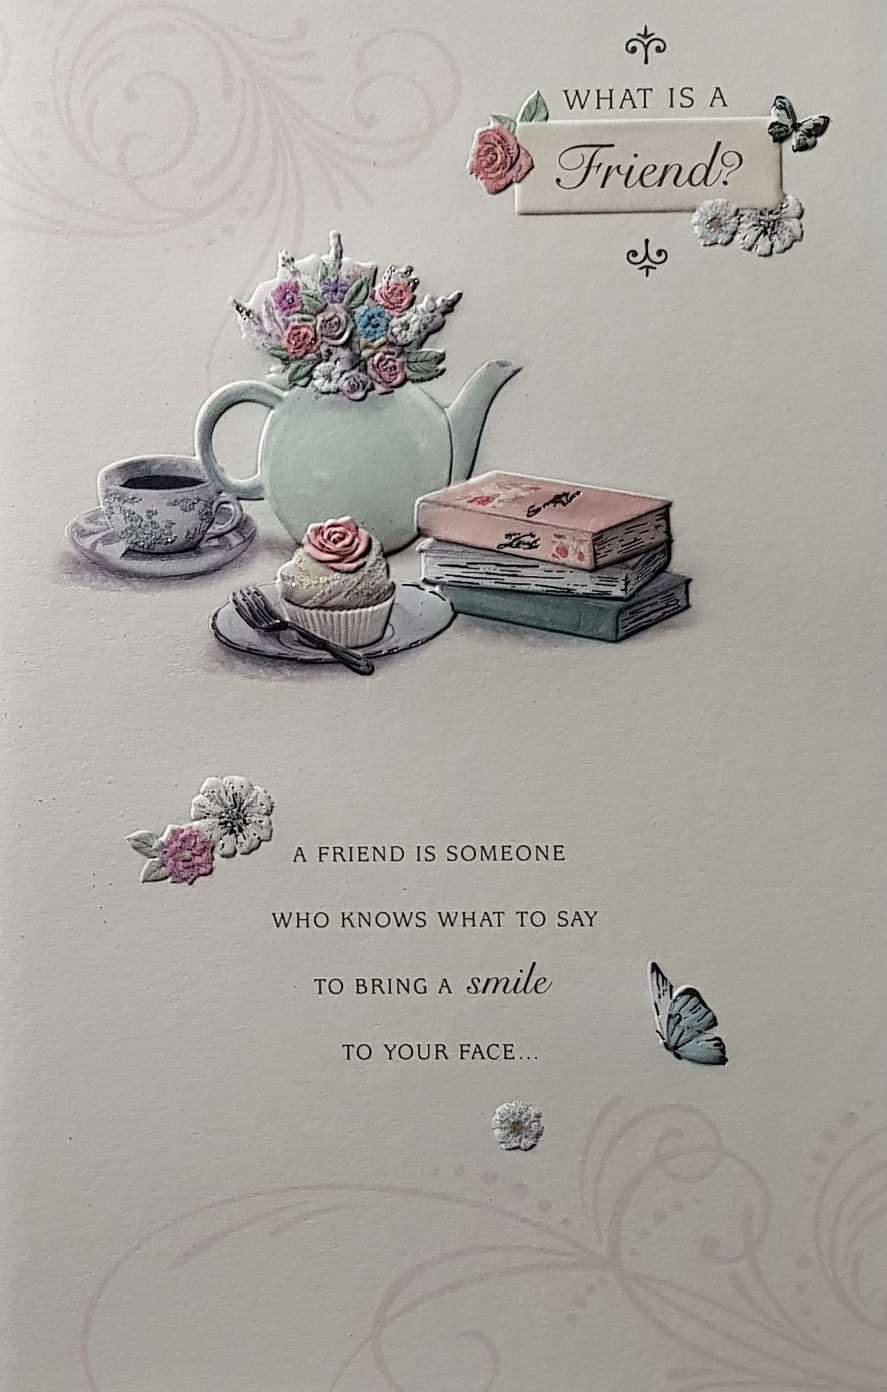 Birthday Card - Friend / What Is A Friend ? & A Delicious Cupcake